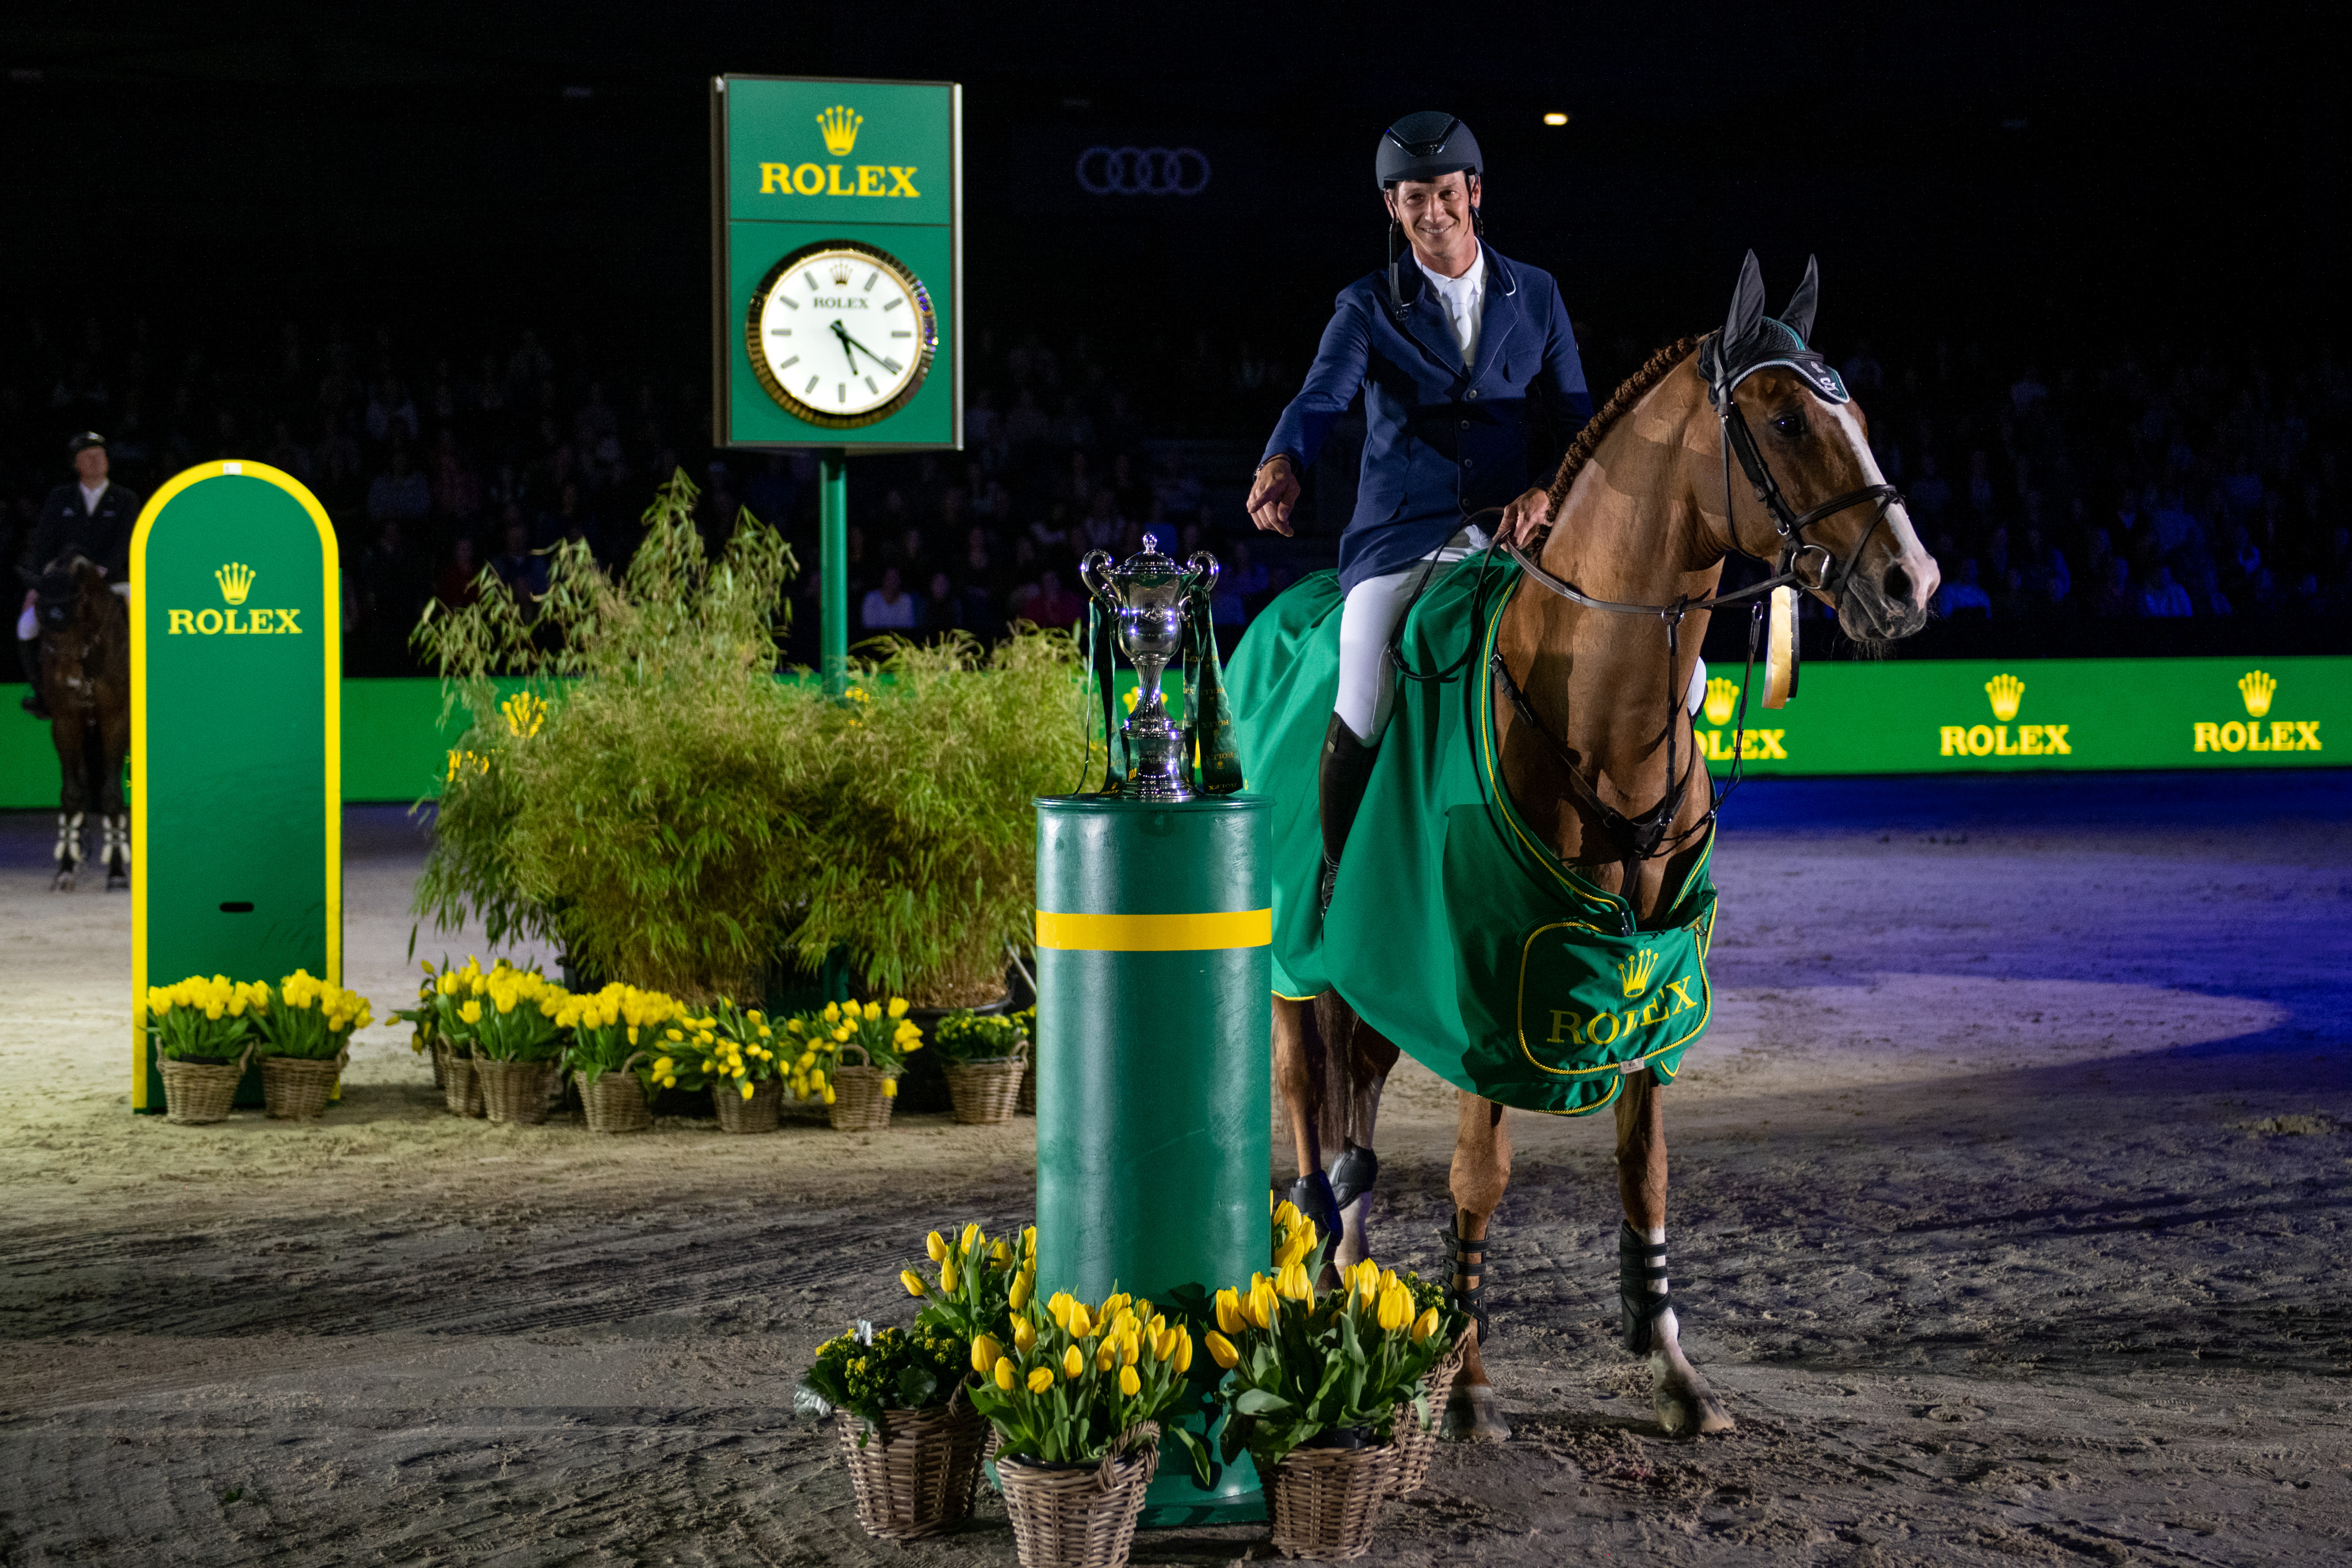 The Dutch Masters 2022 highlights presented by Rolex